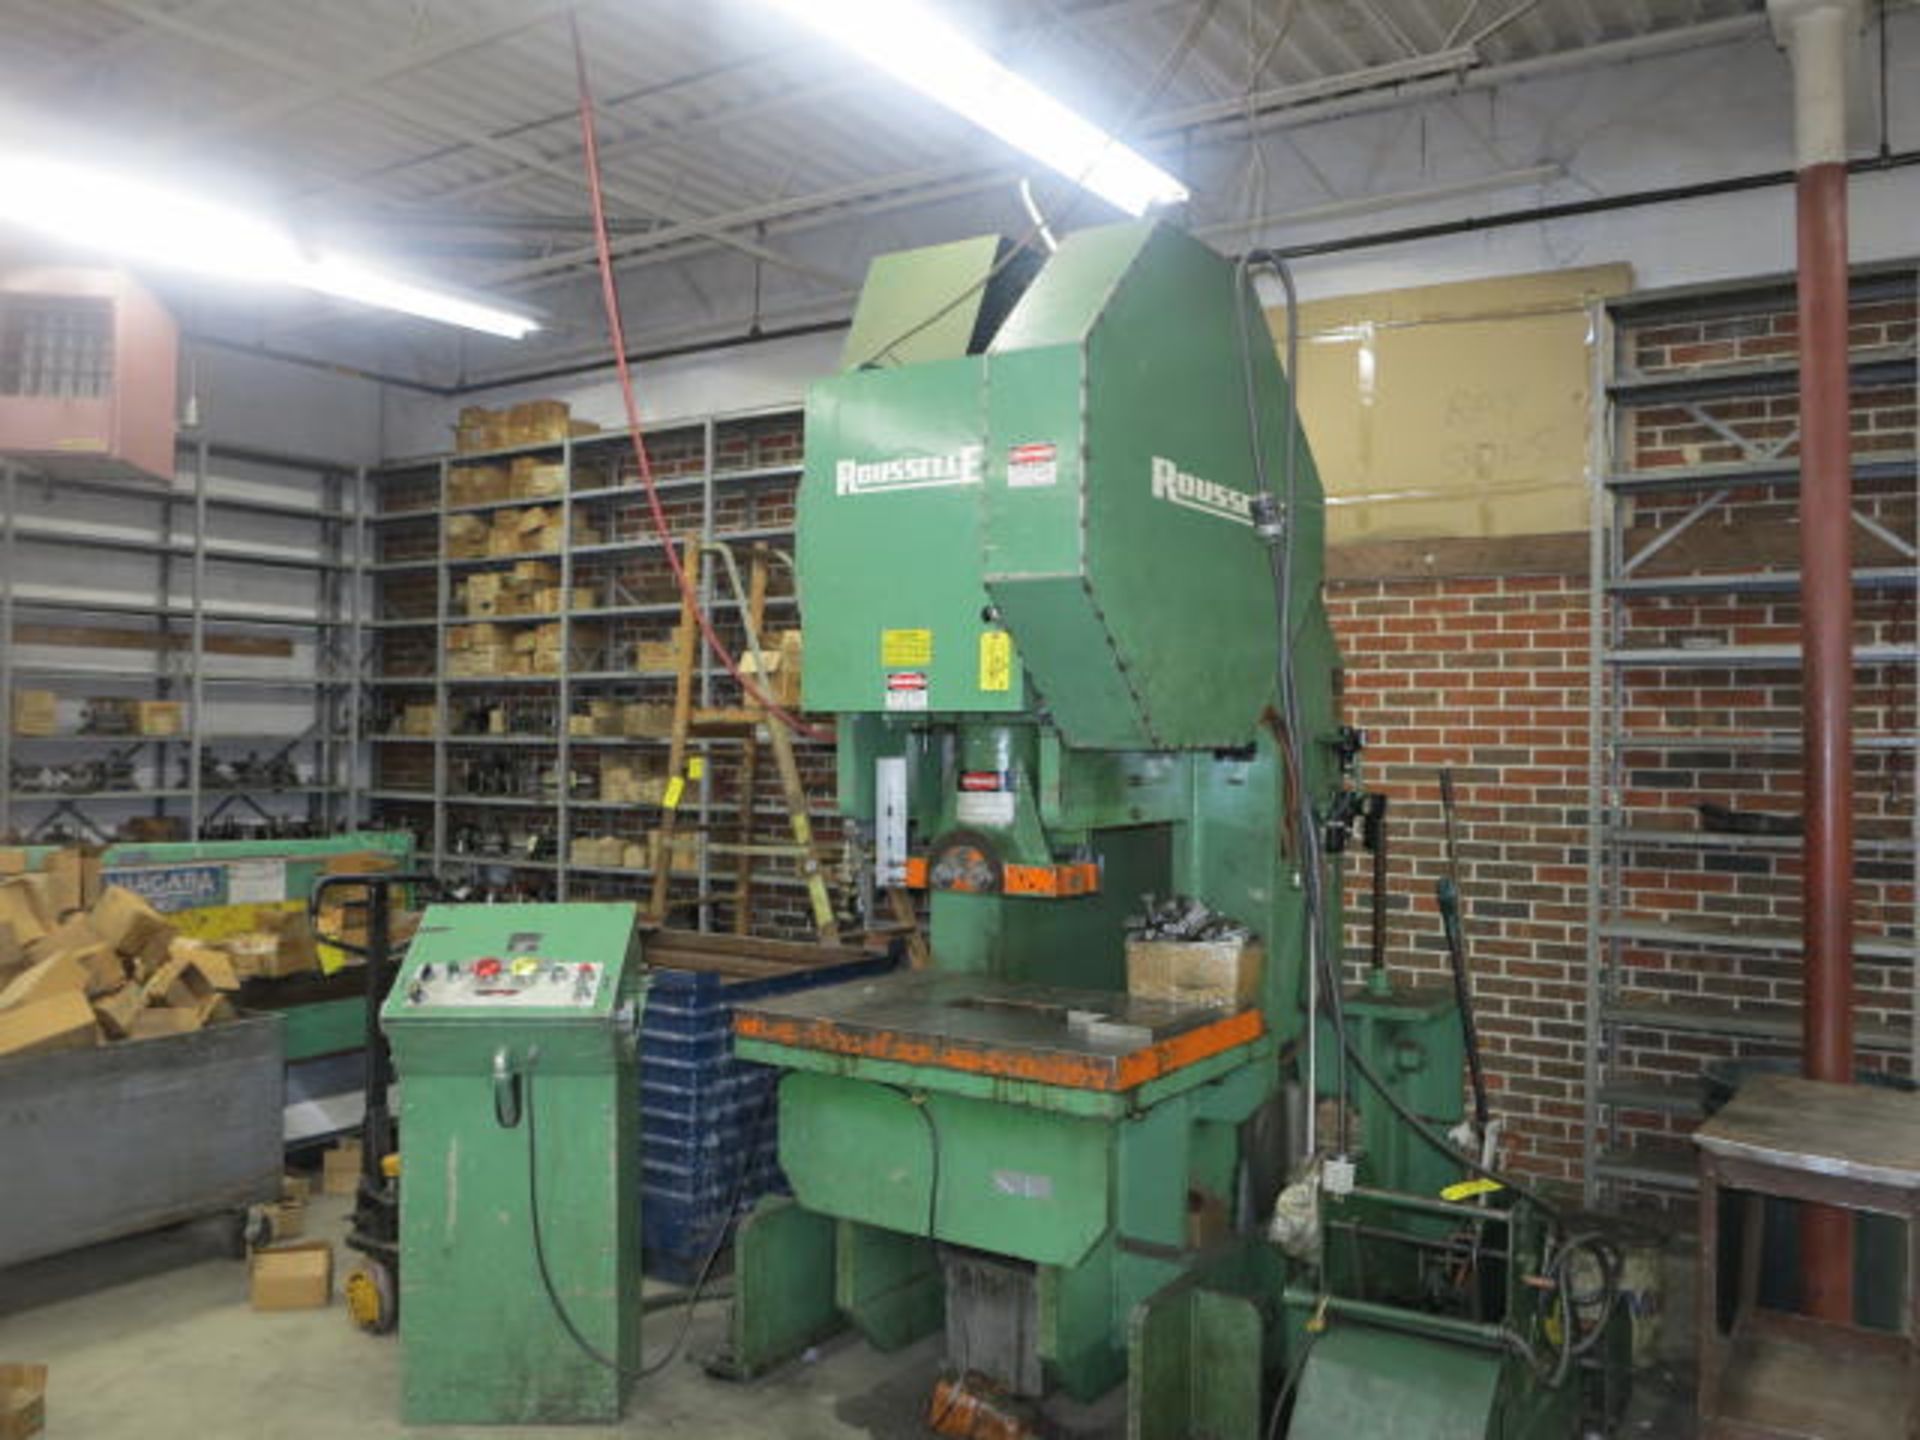 Rousselle 120 Ton OBI Power Press 4''Stroke 4'' Adjustment with Counter Balance S/N 31495 - Image 2 of 2